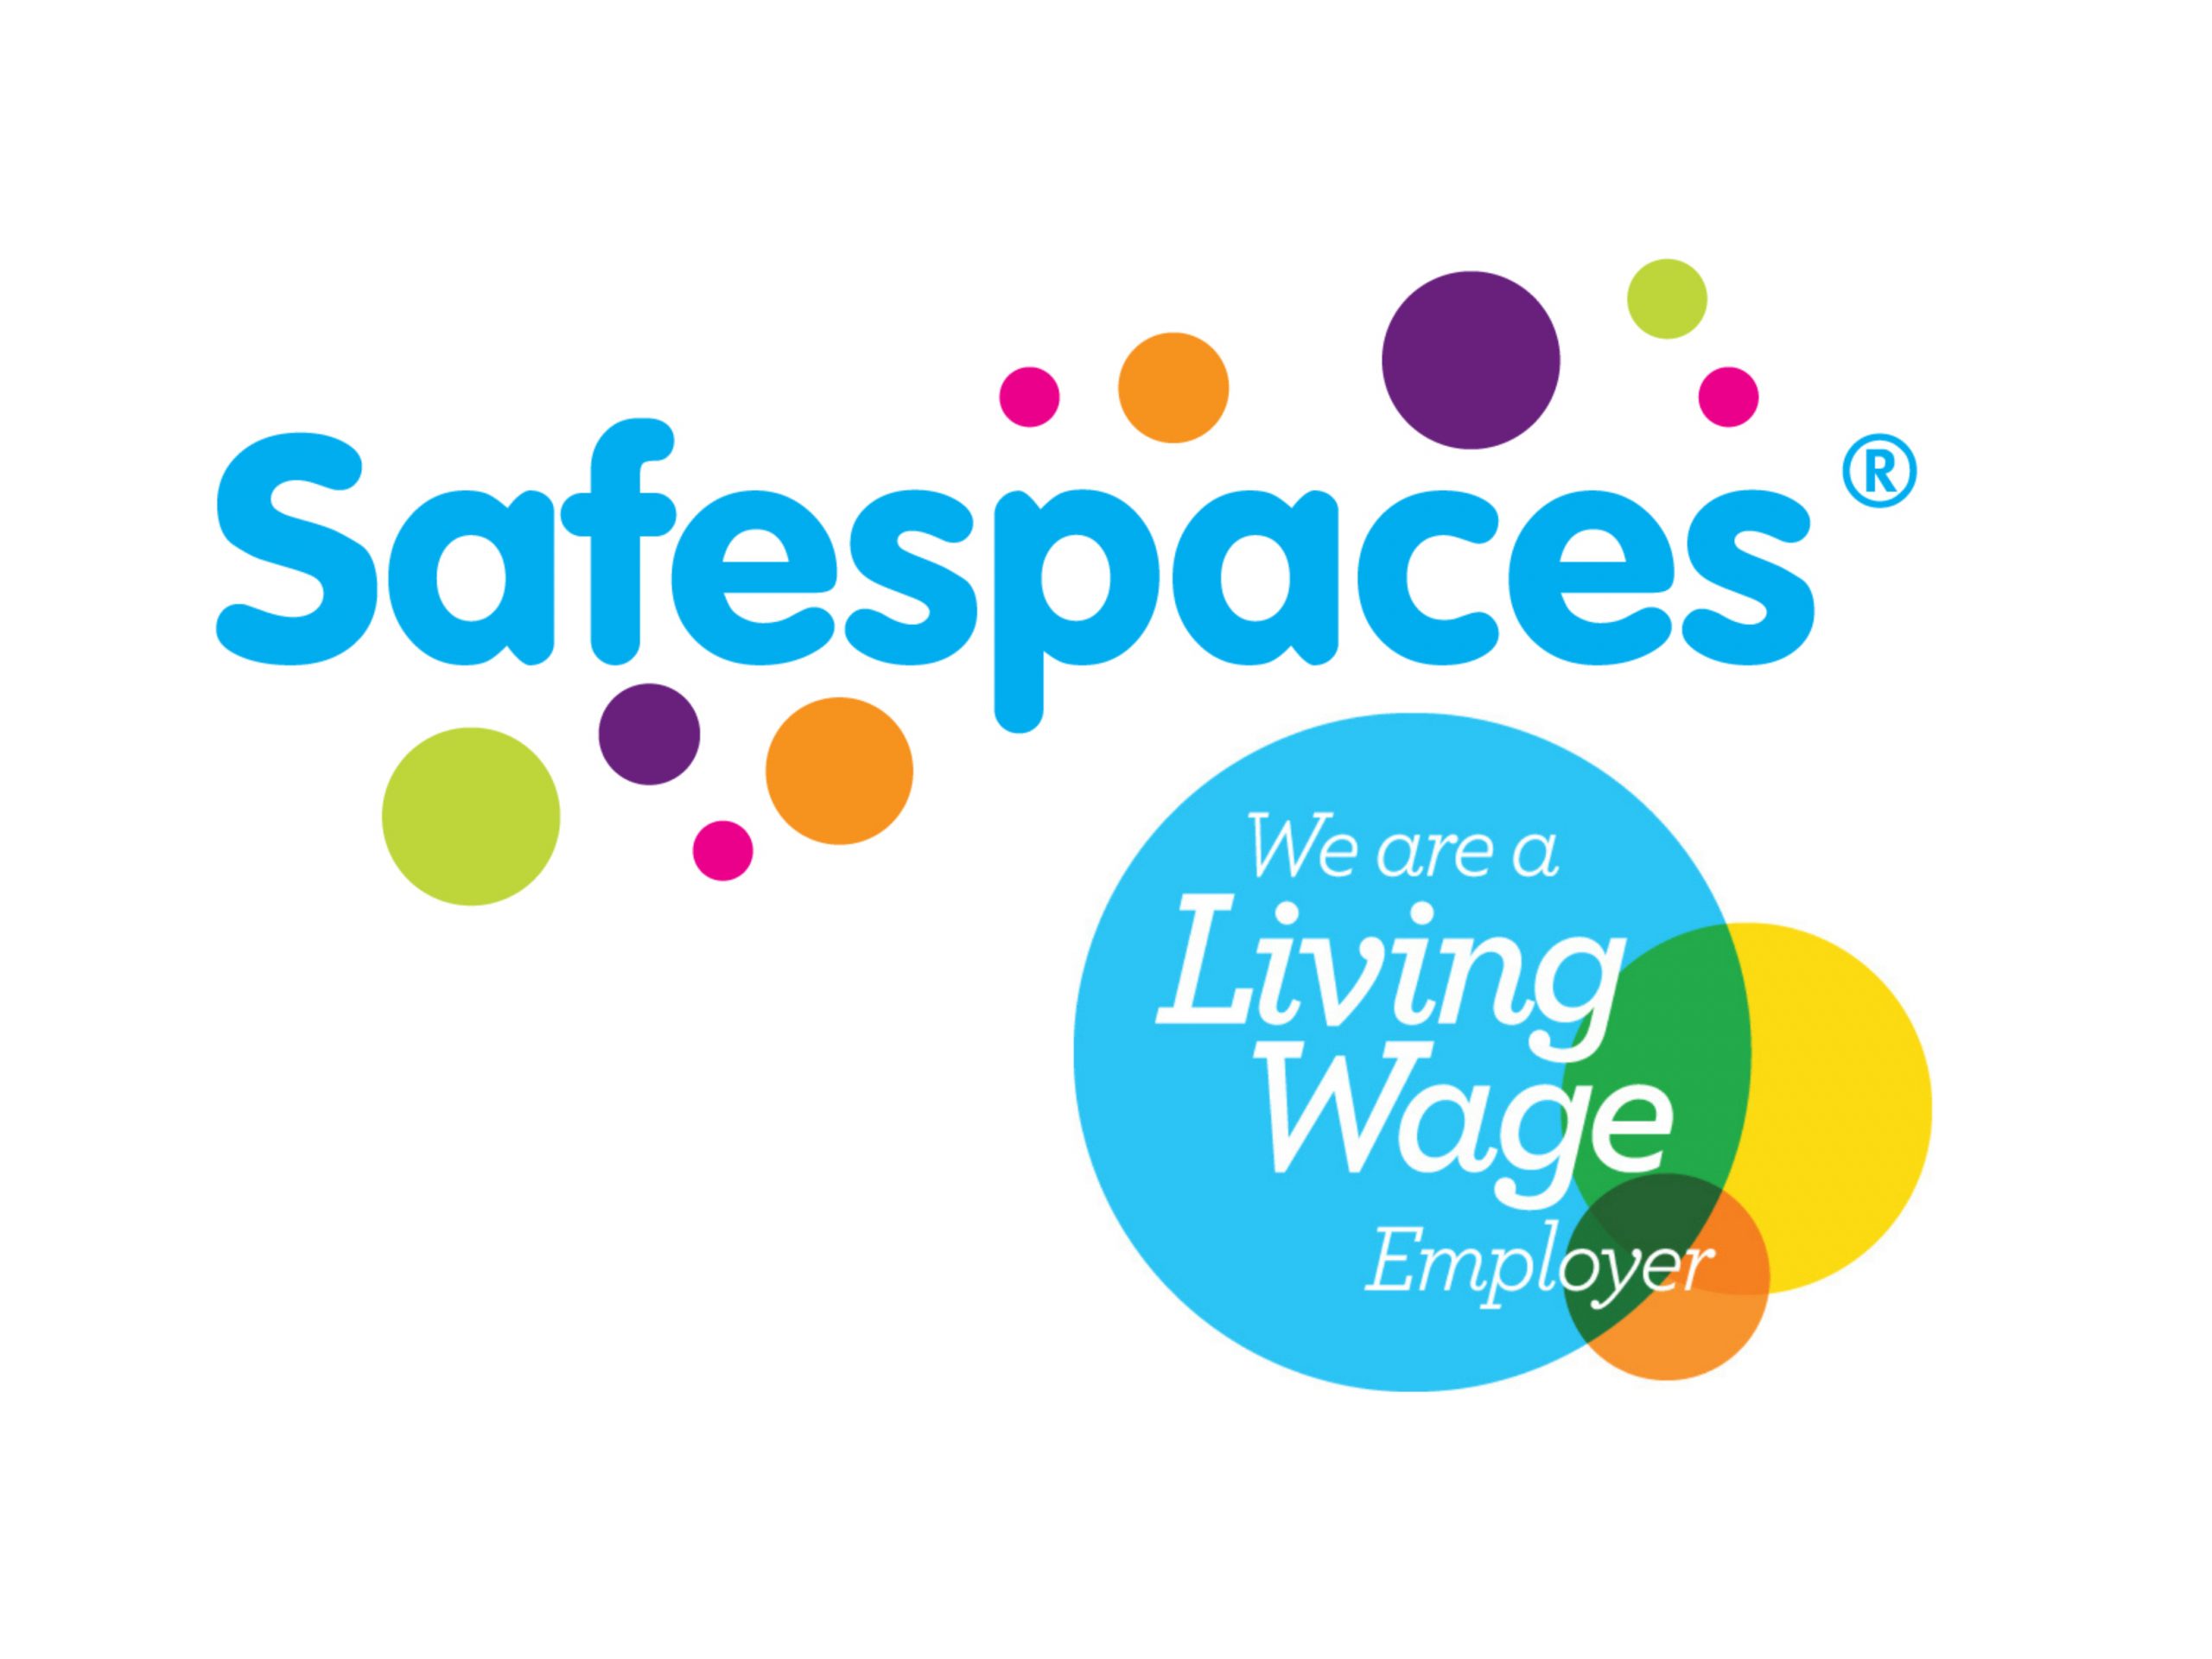 Safespaces Celebrates Commitment to Real Living Wage